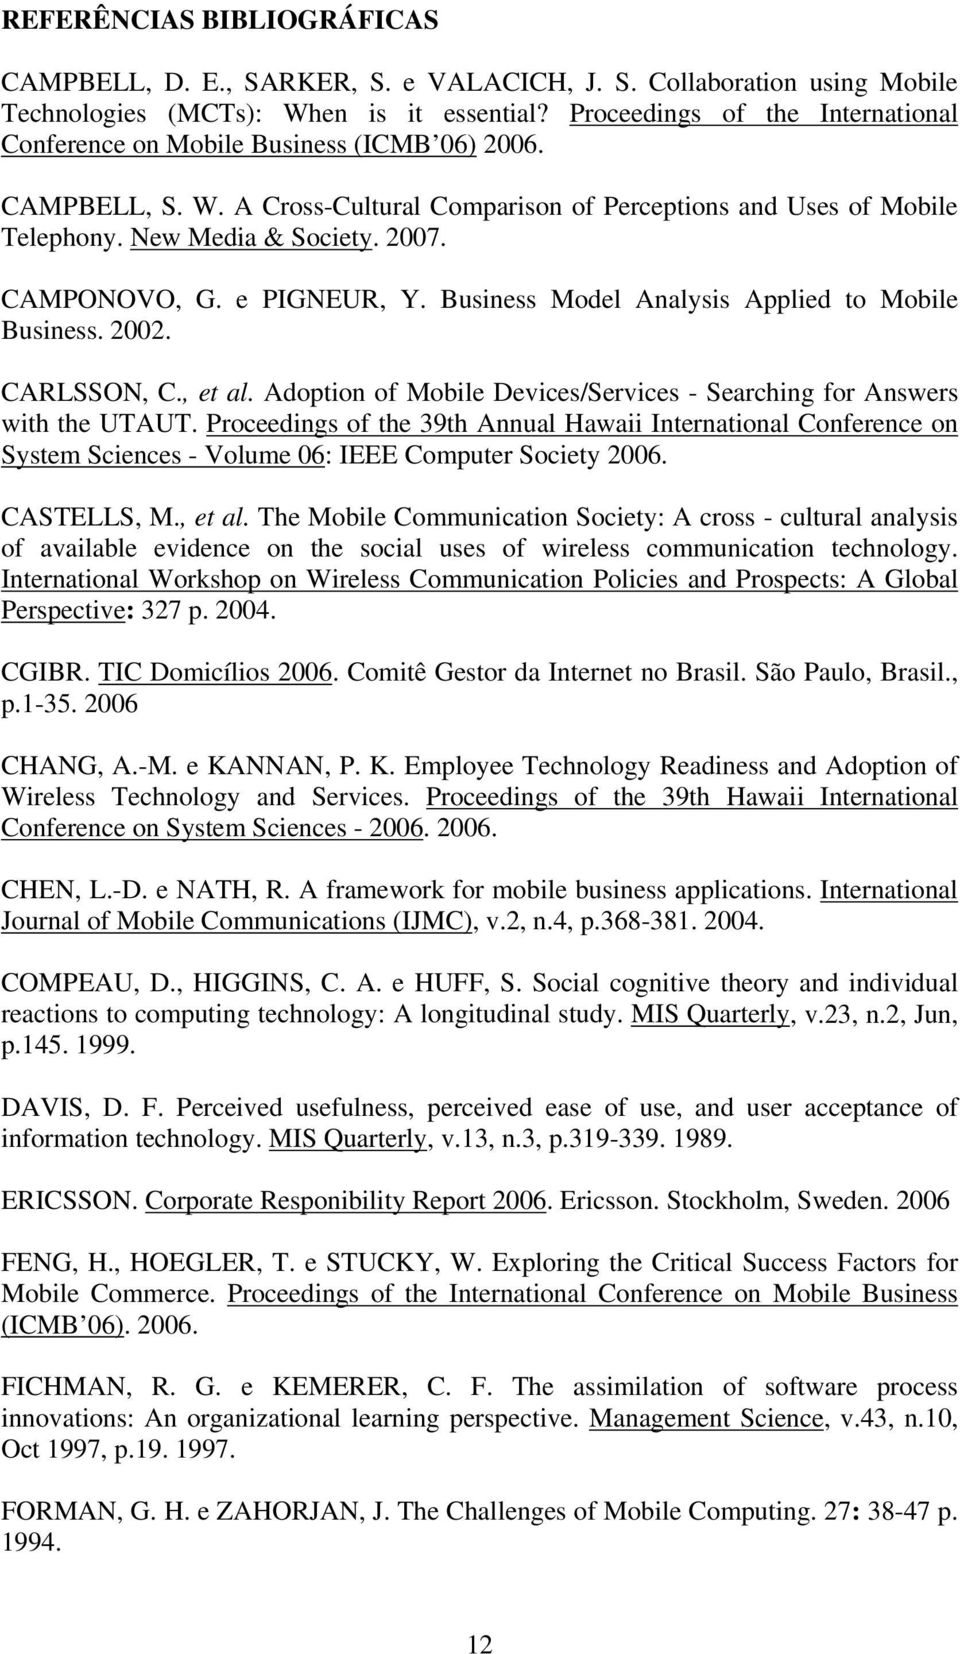 CAMPONOVO, G. e PIGNEUR, Y. Business Model Analysis Applied to Mobile Business. 2002. CARLSSON, C., et al. Adoption of Mobile Devices/Services - Searching for Answers with the UTAUT.